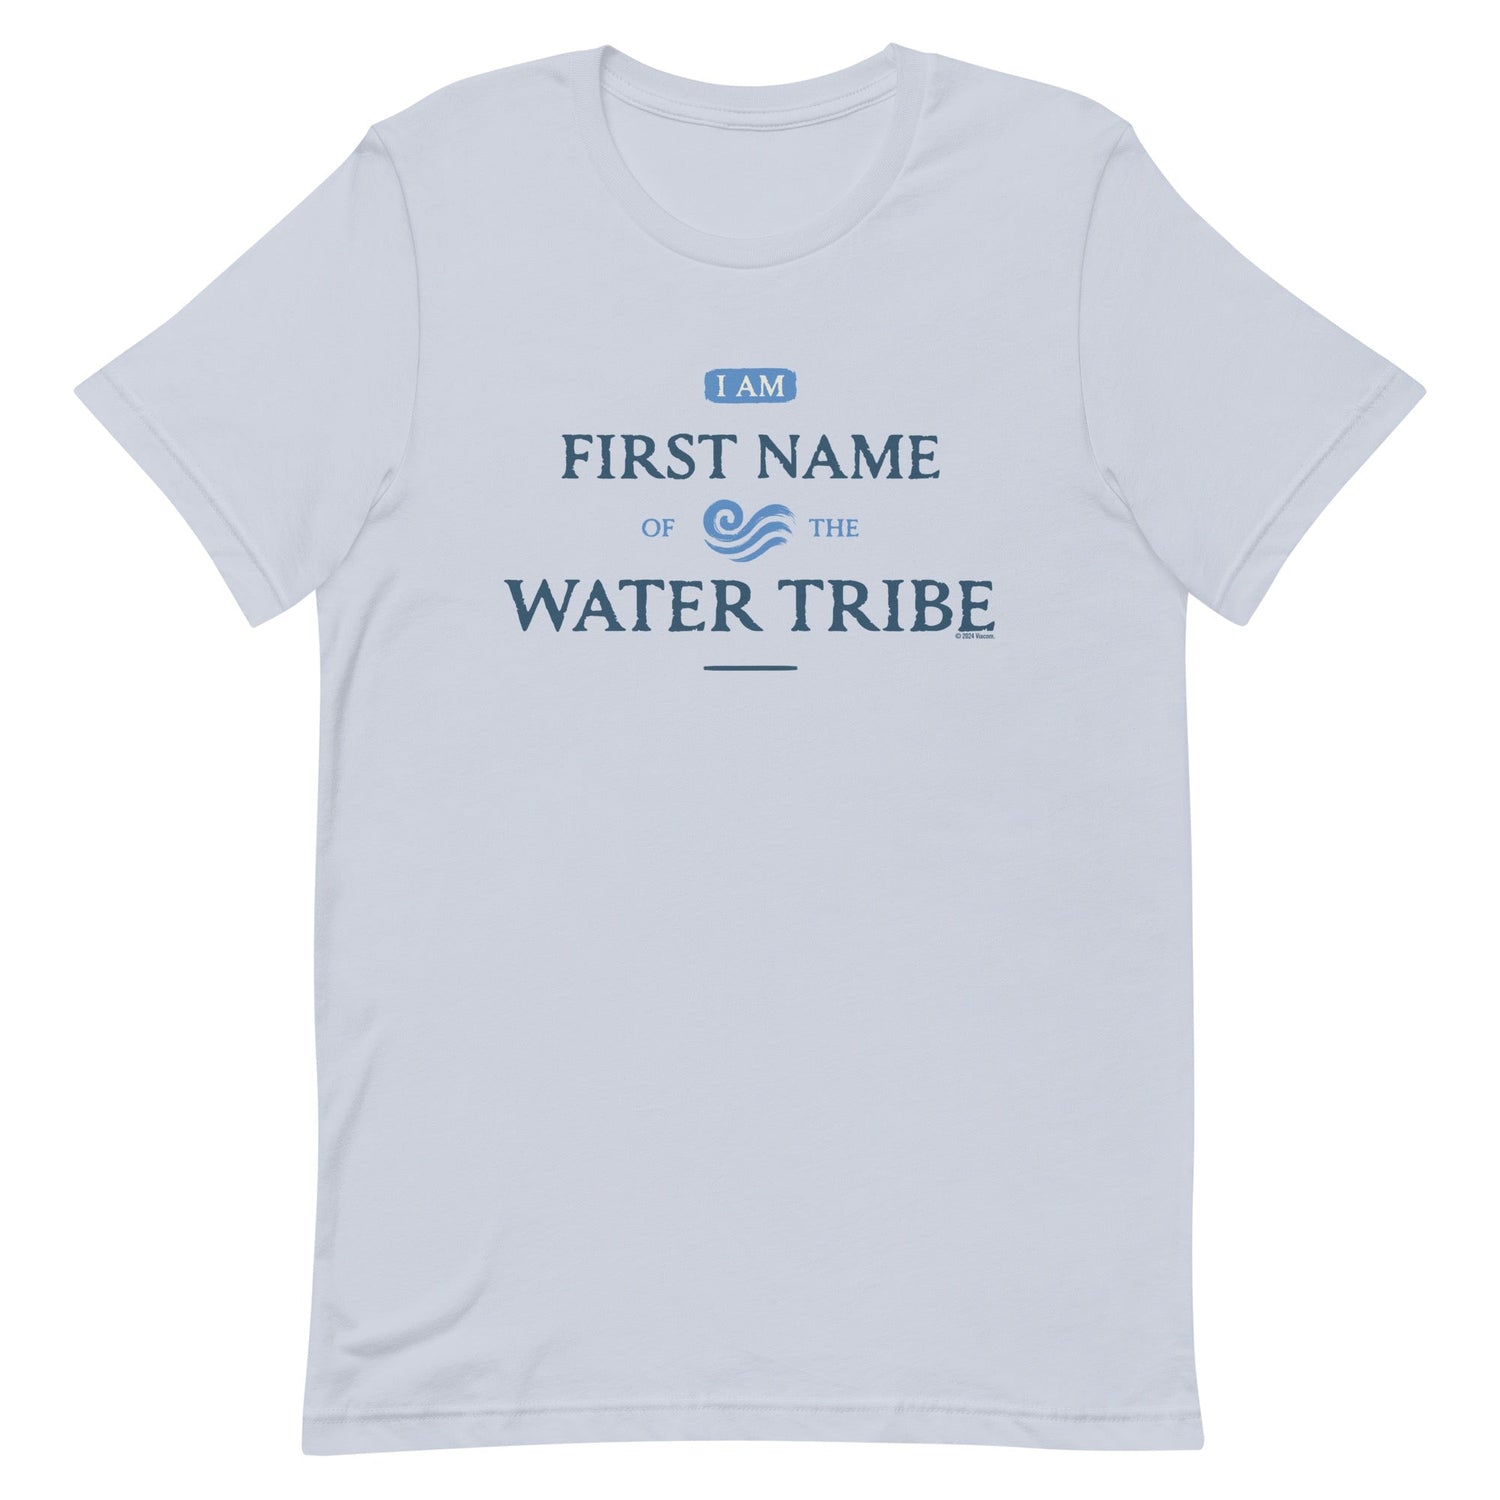 Avatar the Last Airbender Water Tribe Personalized T - Shirt - Paramount Shop